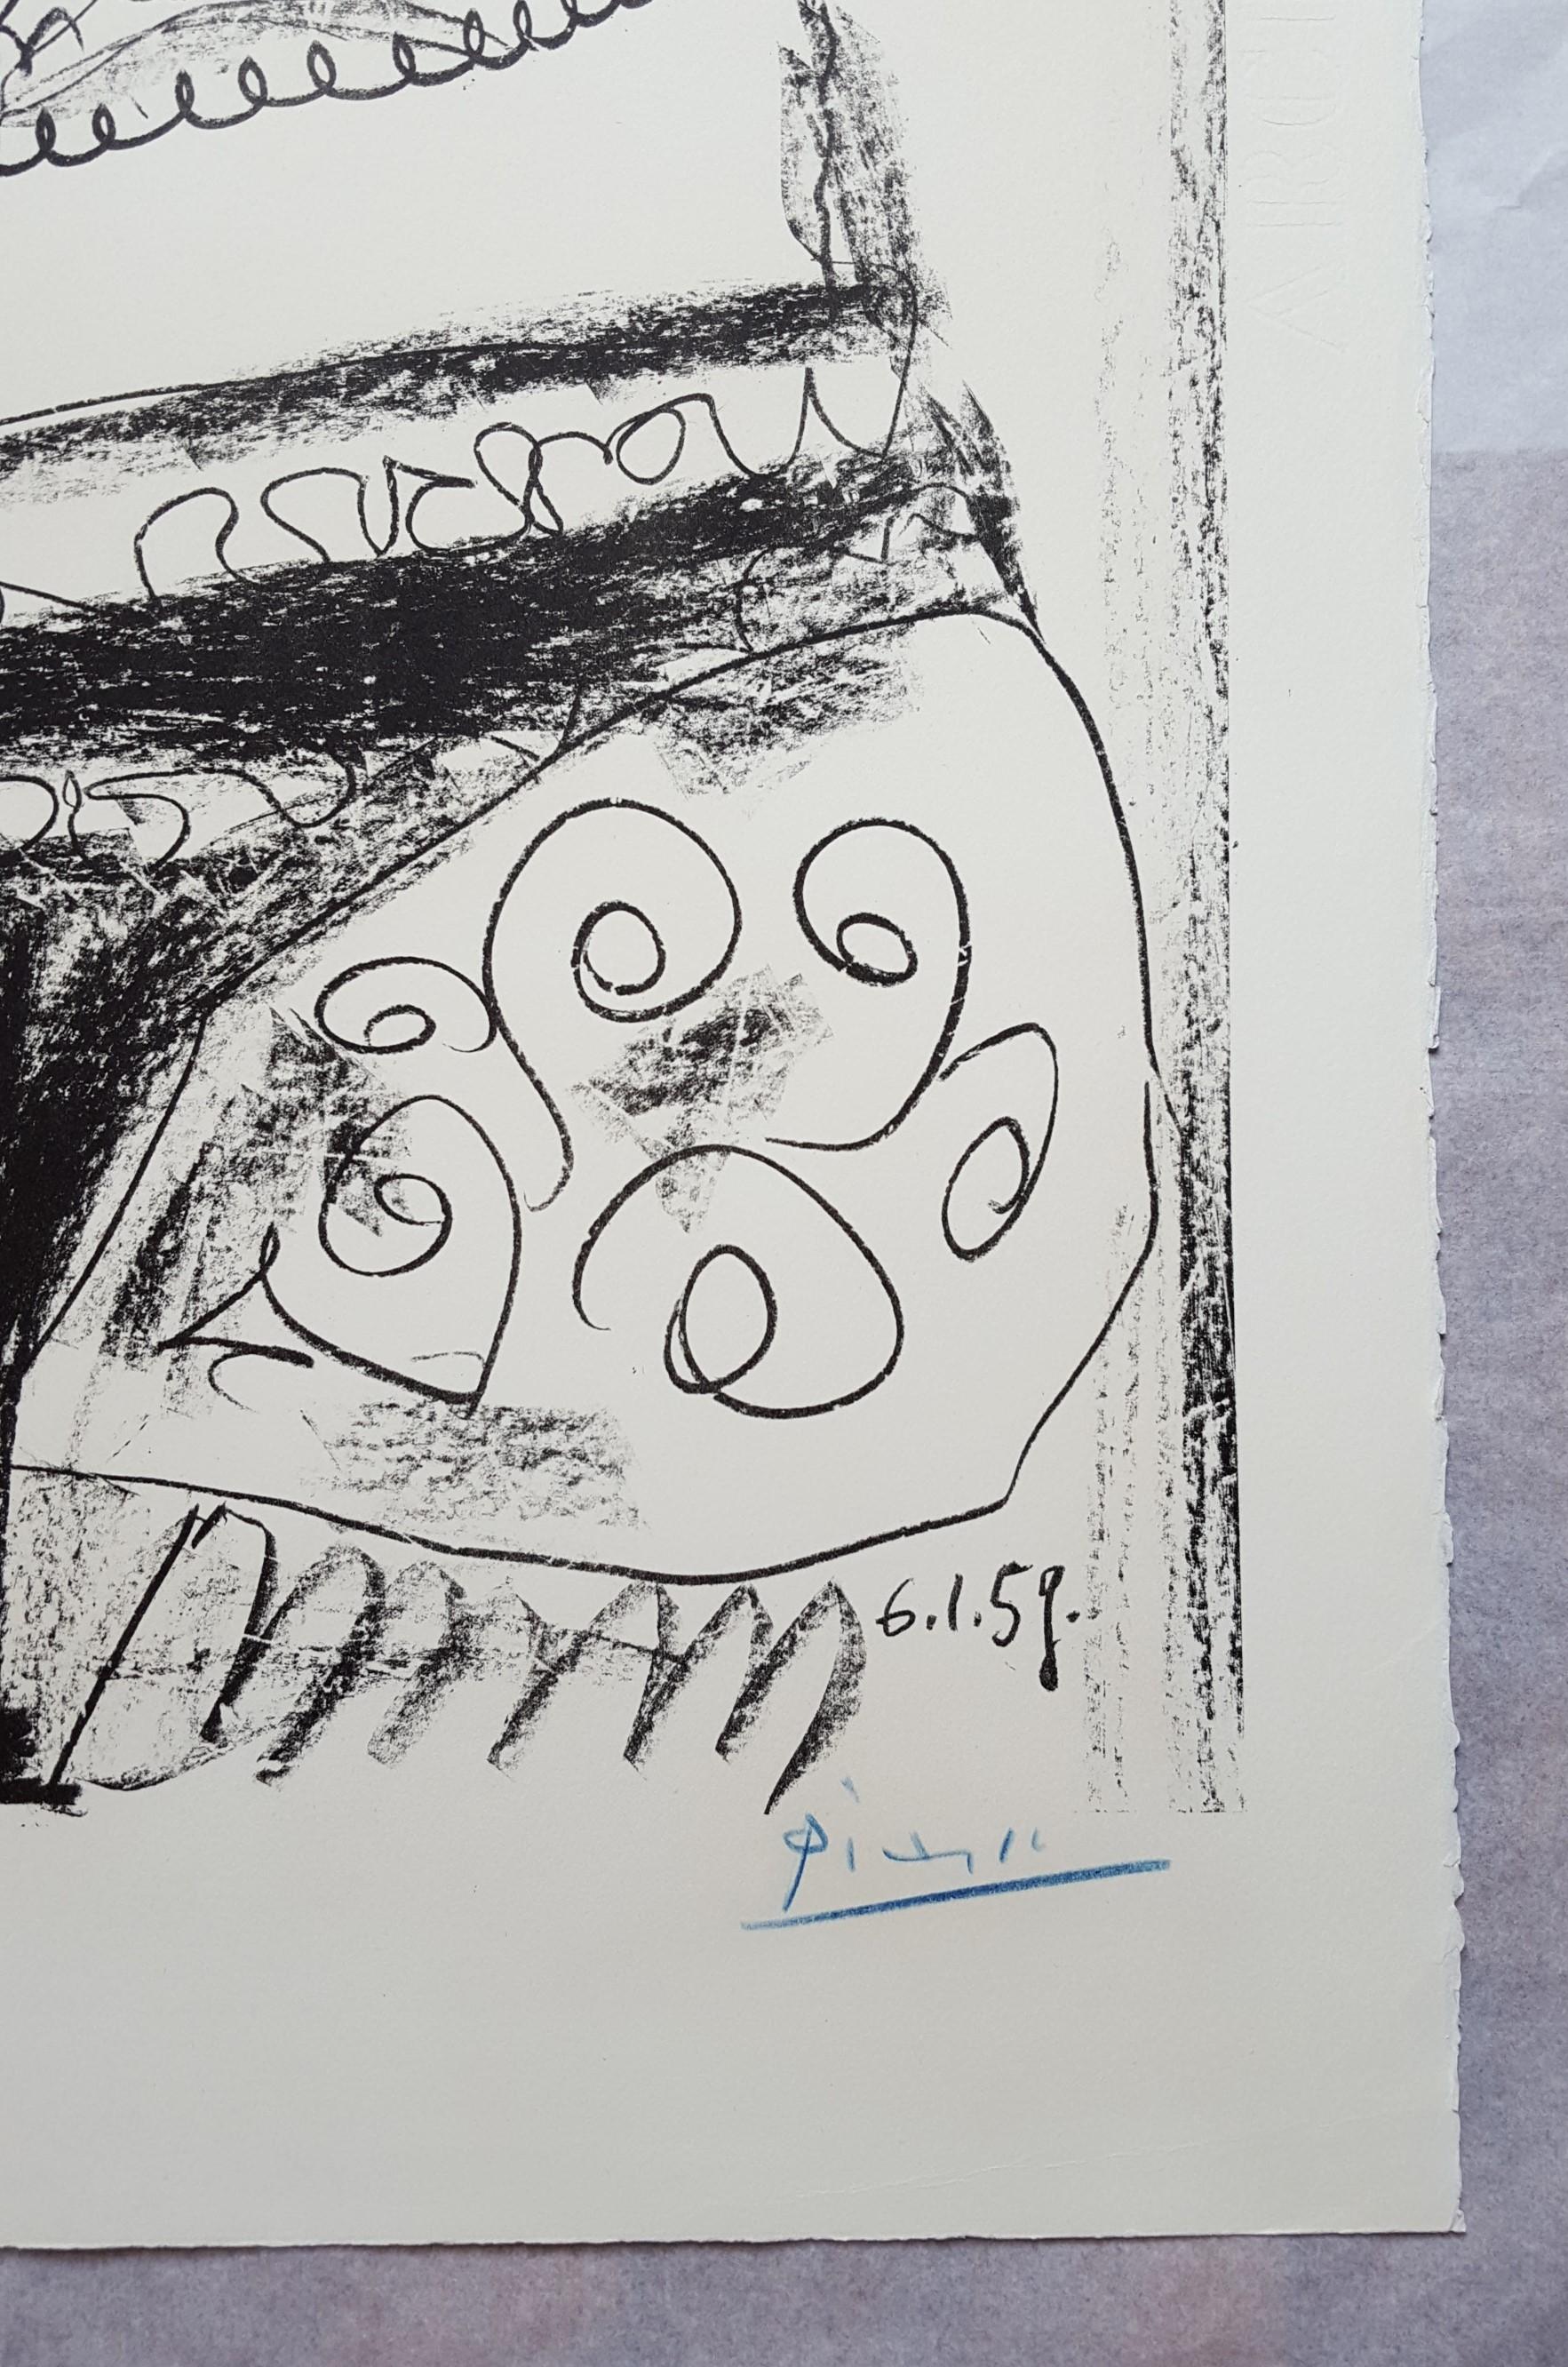 Le Vieux Roi (The Old King) - signed in blue crayon, ed. 200 - Cubist Print by Pablo Picasso